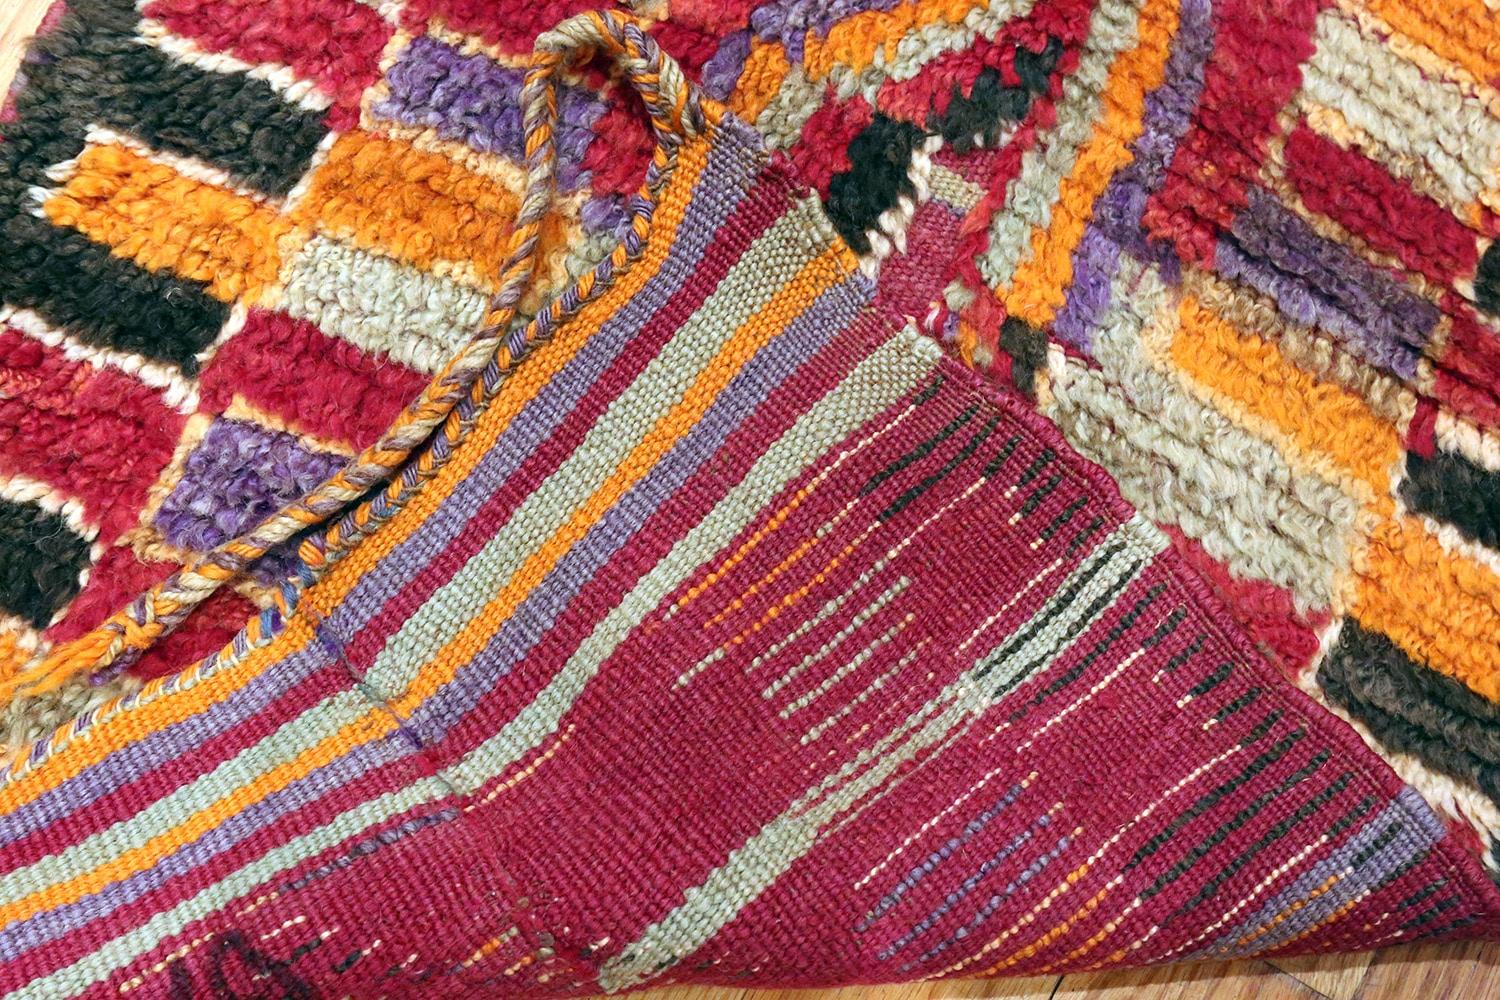 Highly artistic and funky purple vintage Moroccan runner rug, Country of origin / Rugs type: Moroccan rugs, date circa mid-20th century. Size: 1 ft 9 in x 15 ft (0.53 m x 4.57 m). 

This cheerful vintage runner rug from Morocco will fool you into